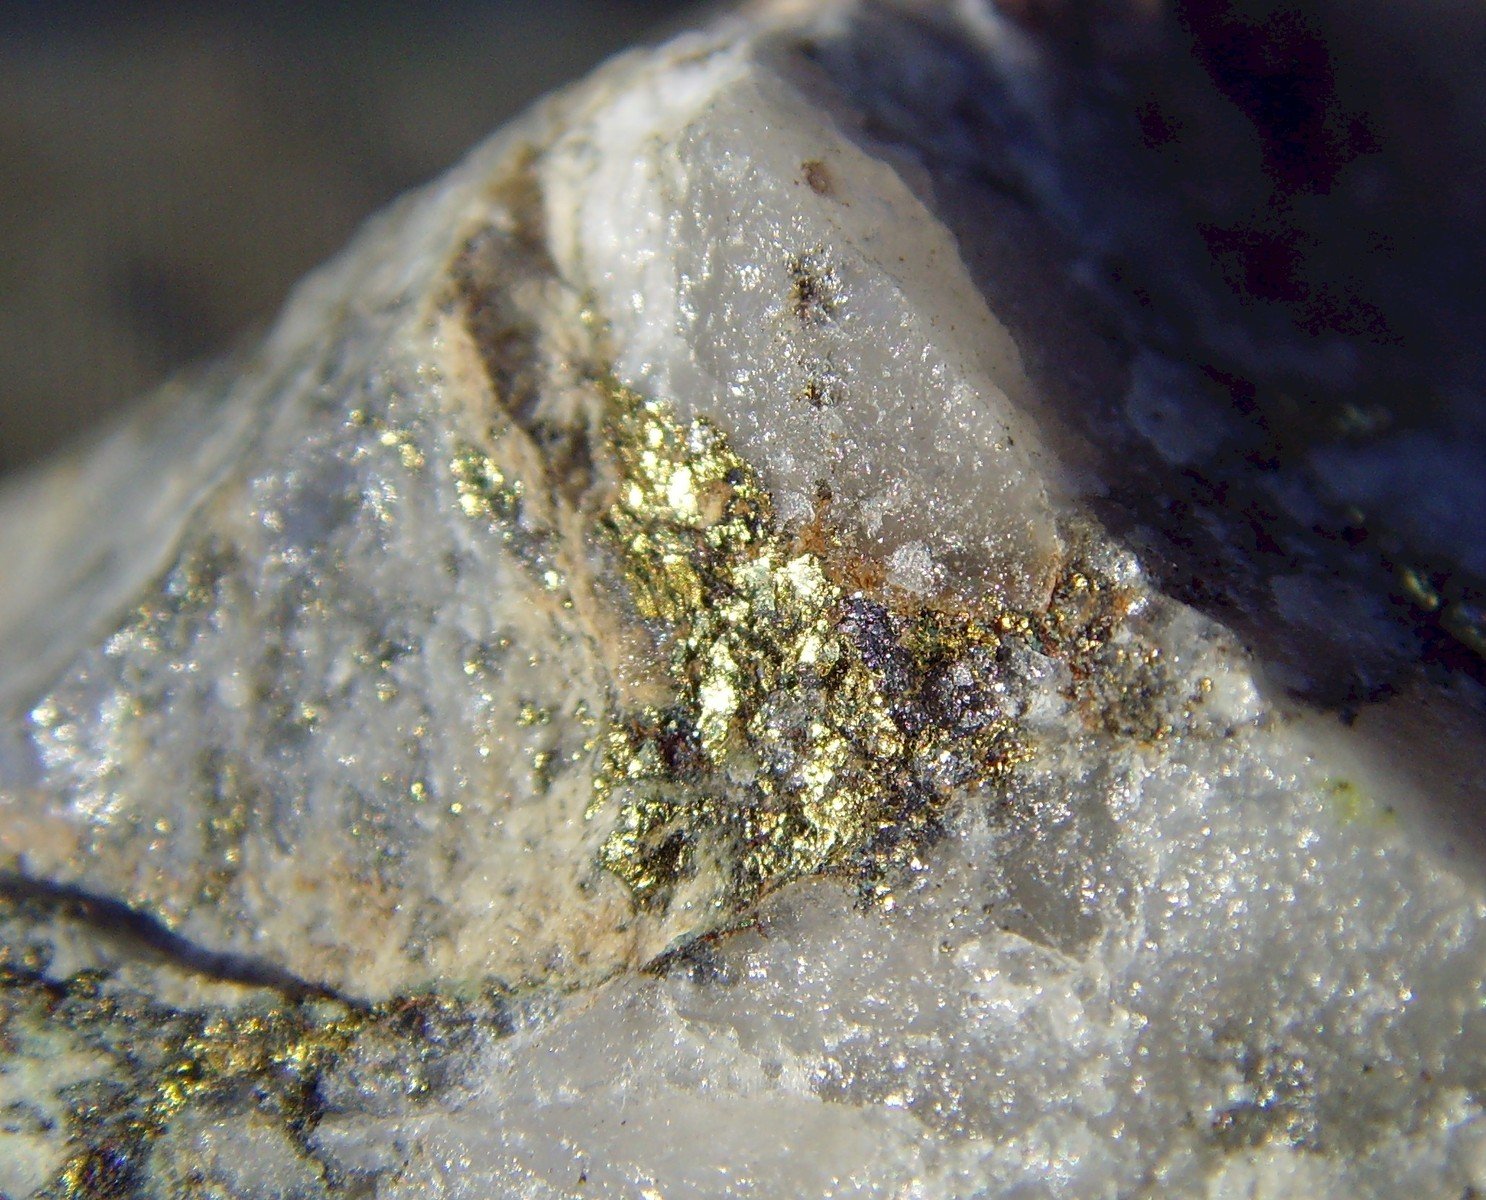 a close up of a rock containing various dirt and moss